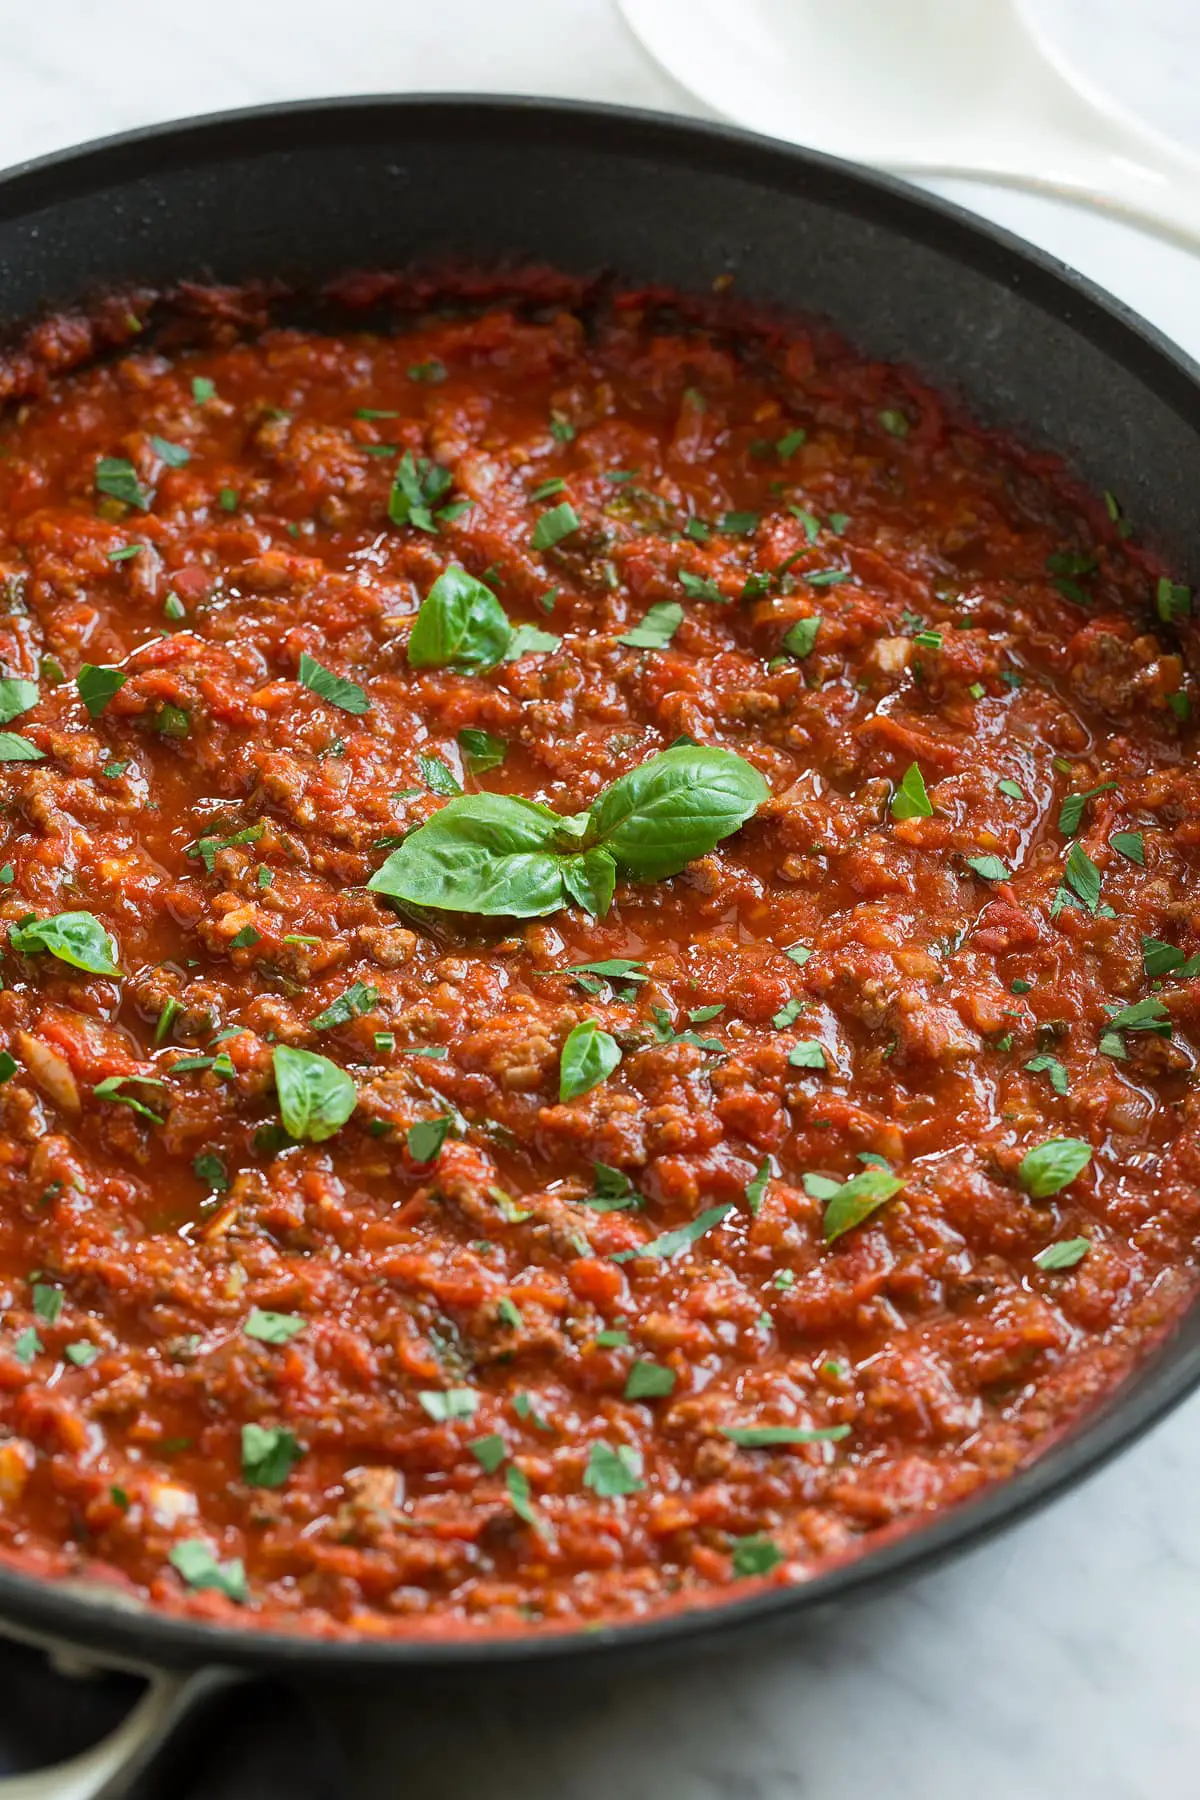 20 Of the Best Ideas for Spaghetti Sauce Ingredients ...